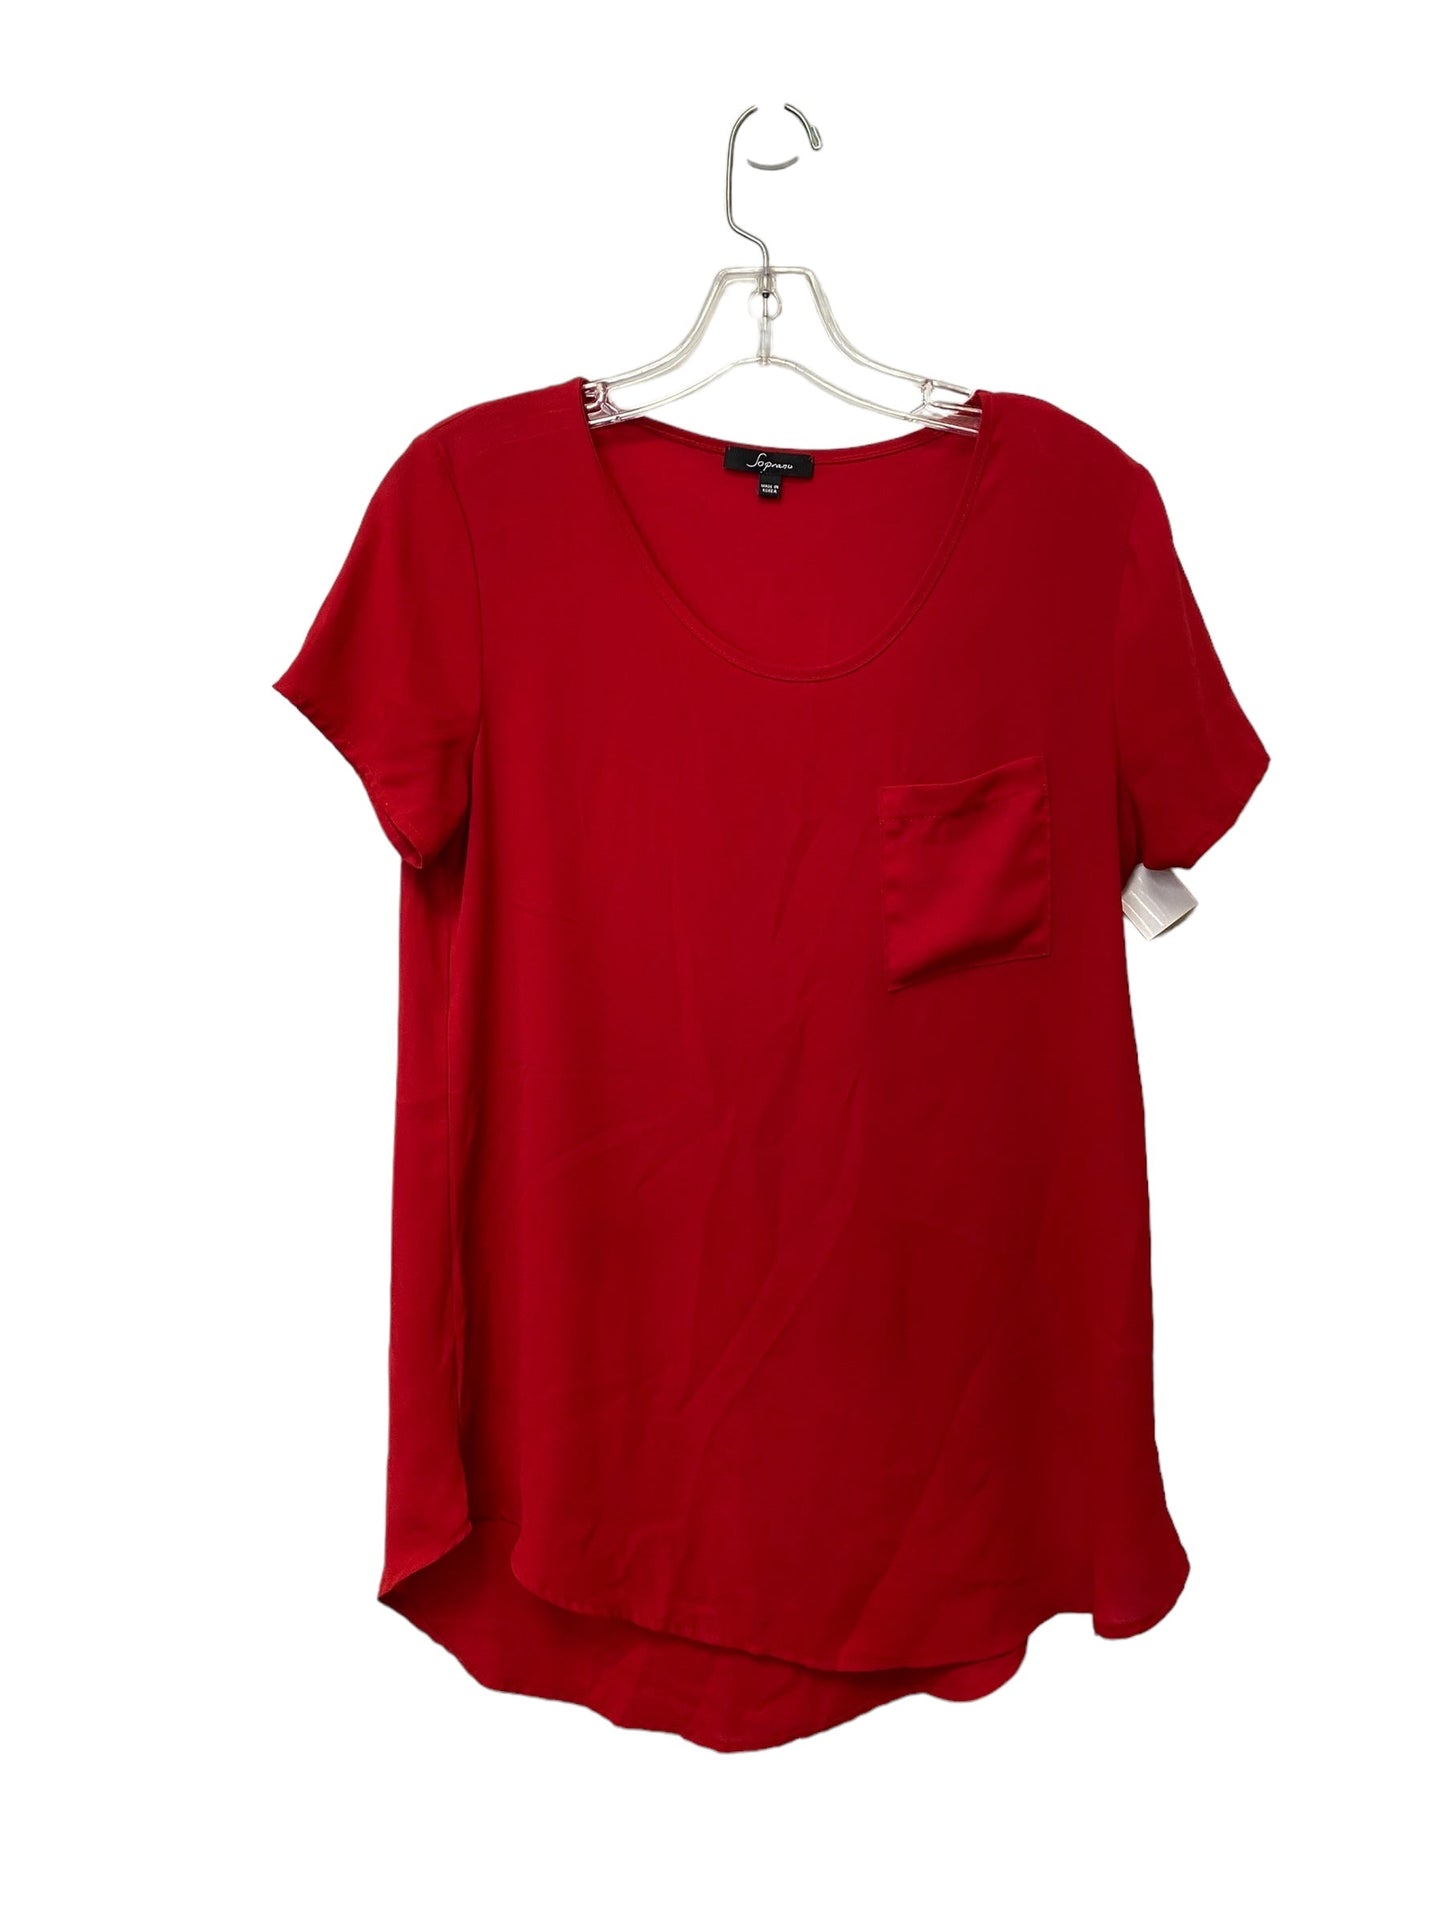 Red Top Short Sleeve Basic Soprano, Size M